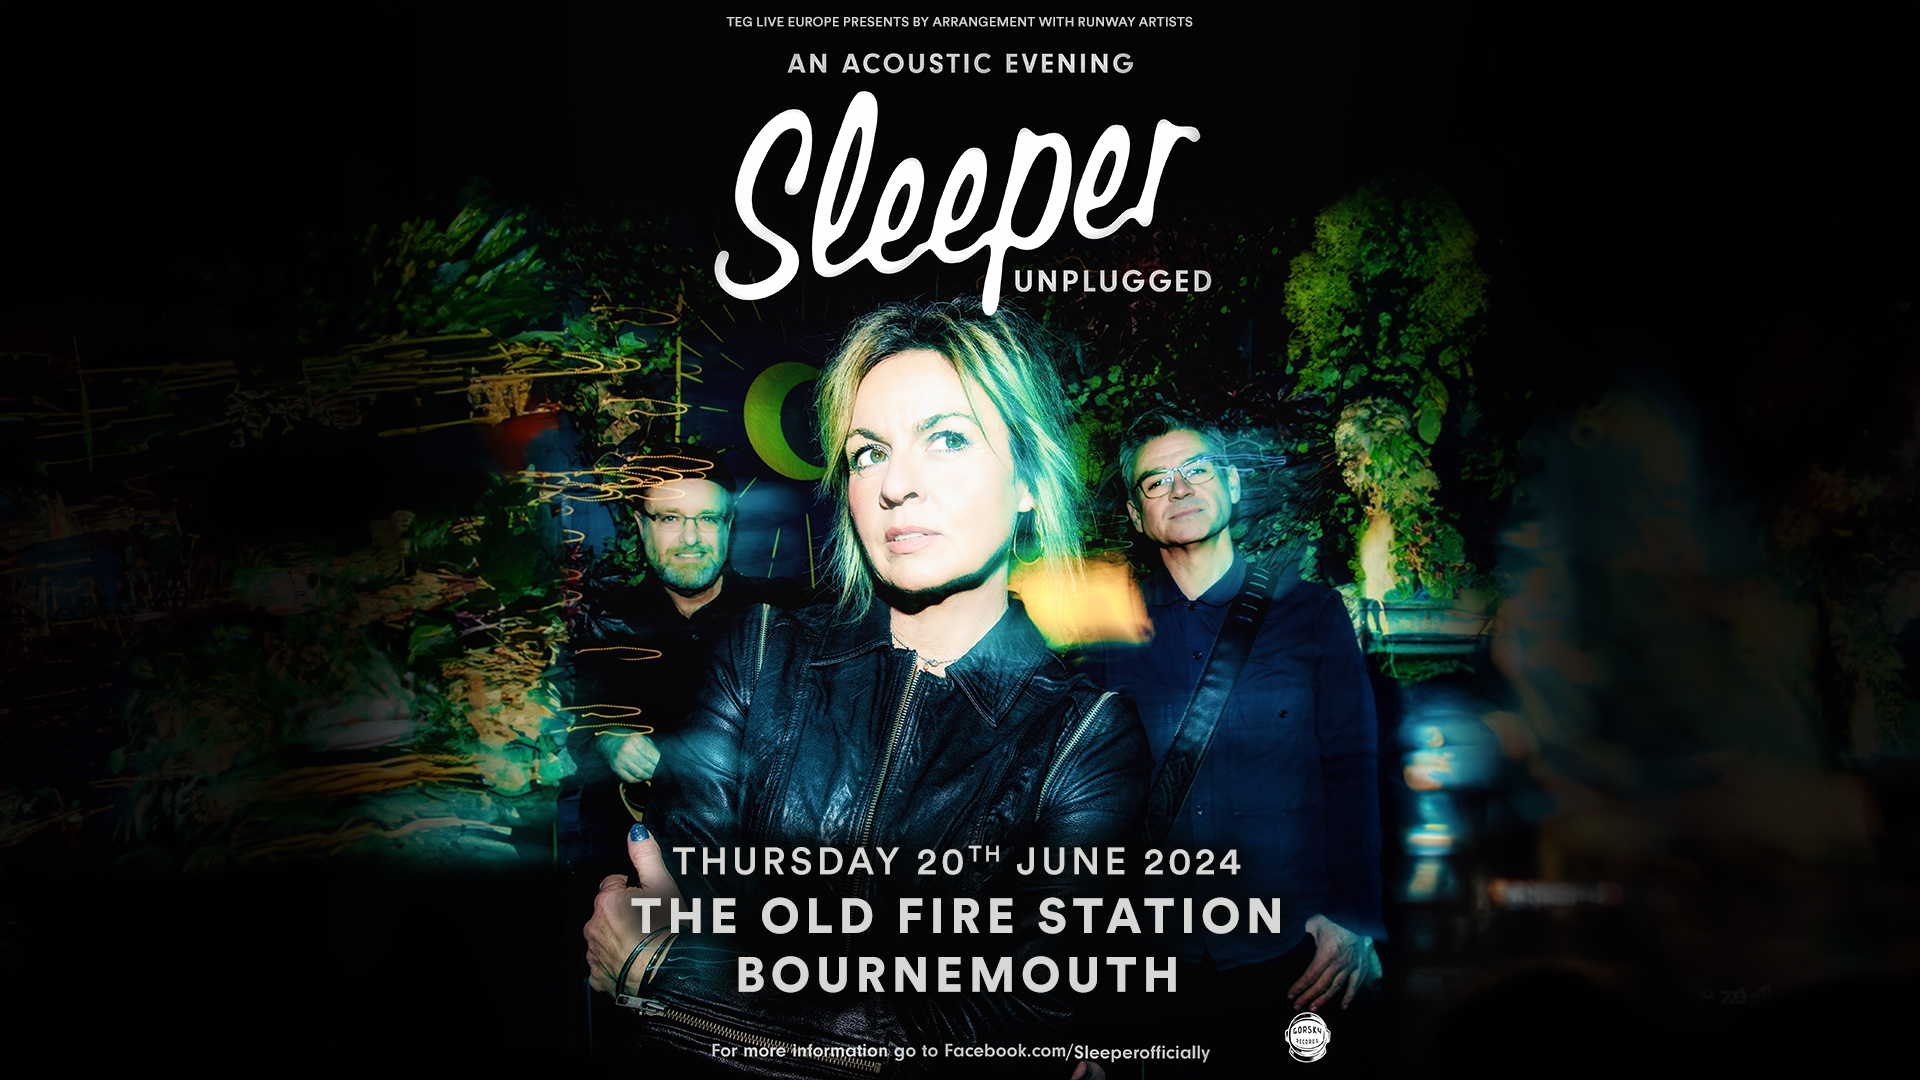 Bournemouth, join us for an intimate performance from Sleeper, plus a special Q & A!